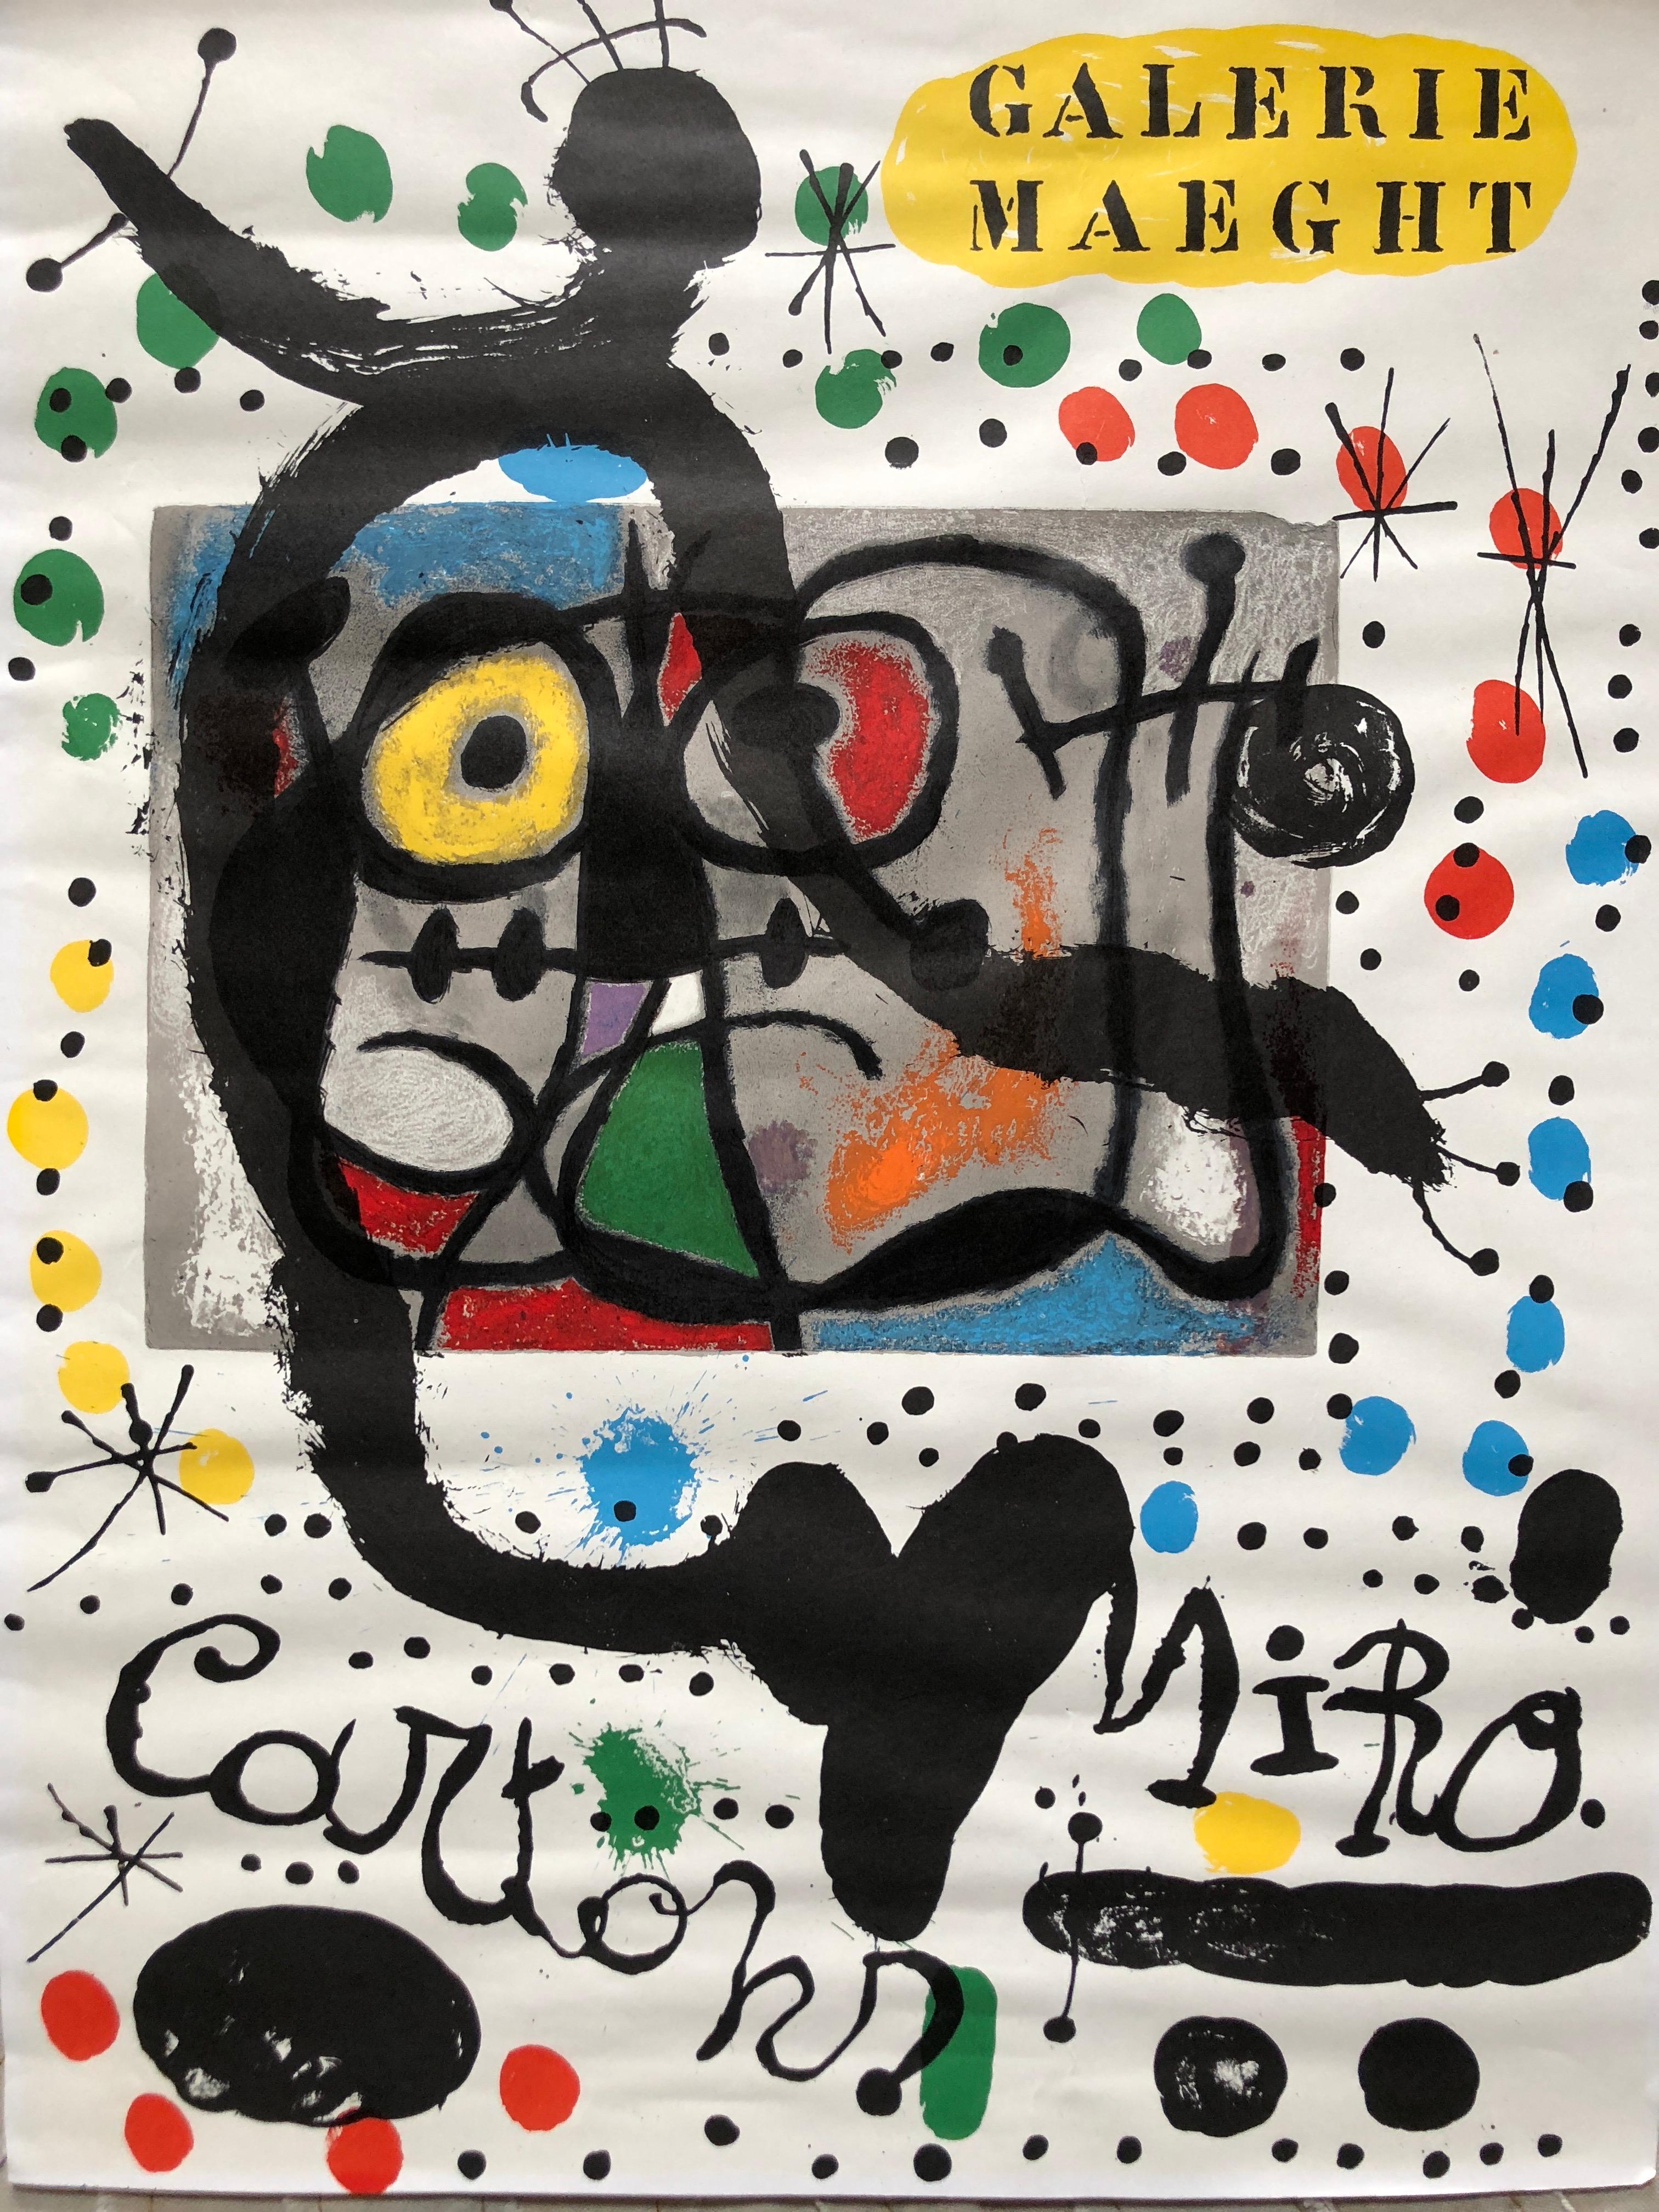 1965 Joan Miro Galerie Maeght Abstract Lithograph